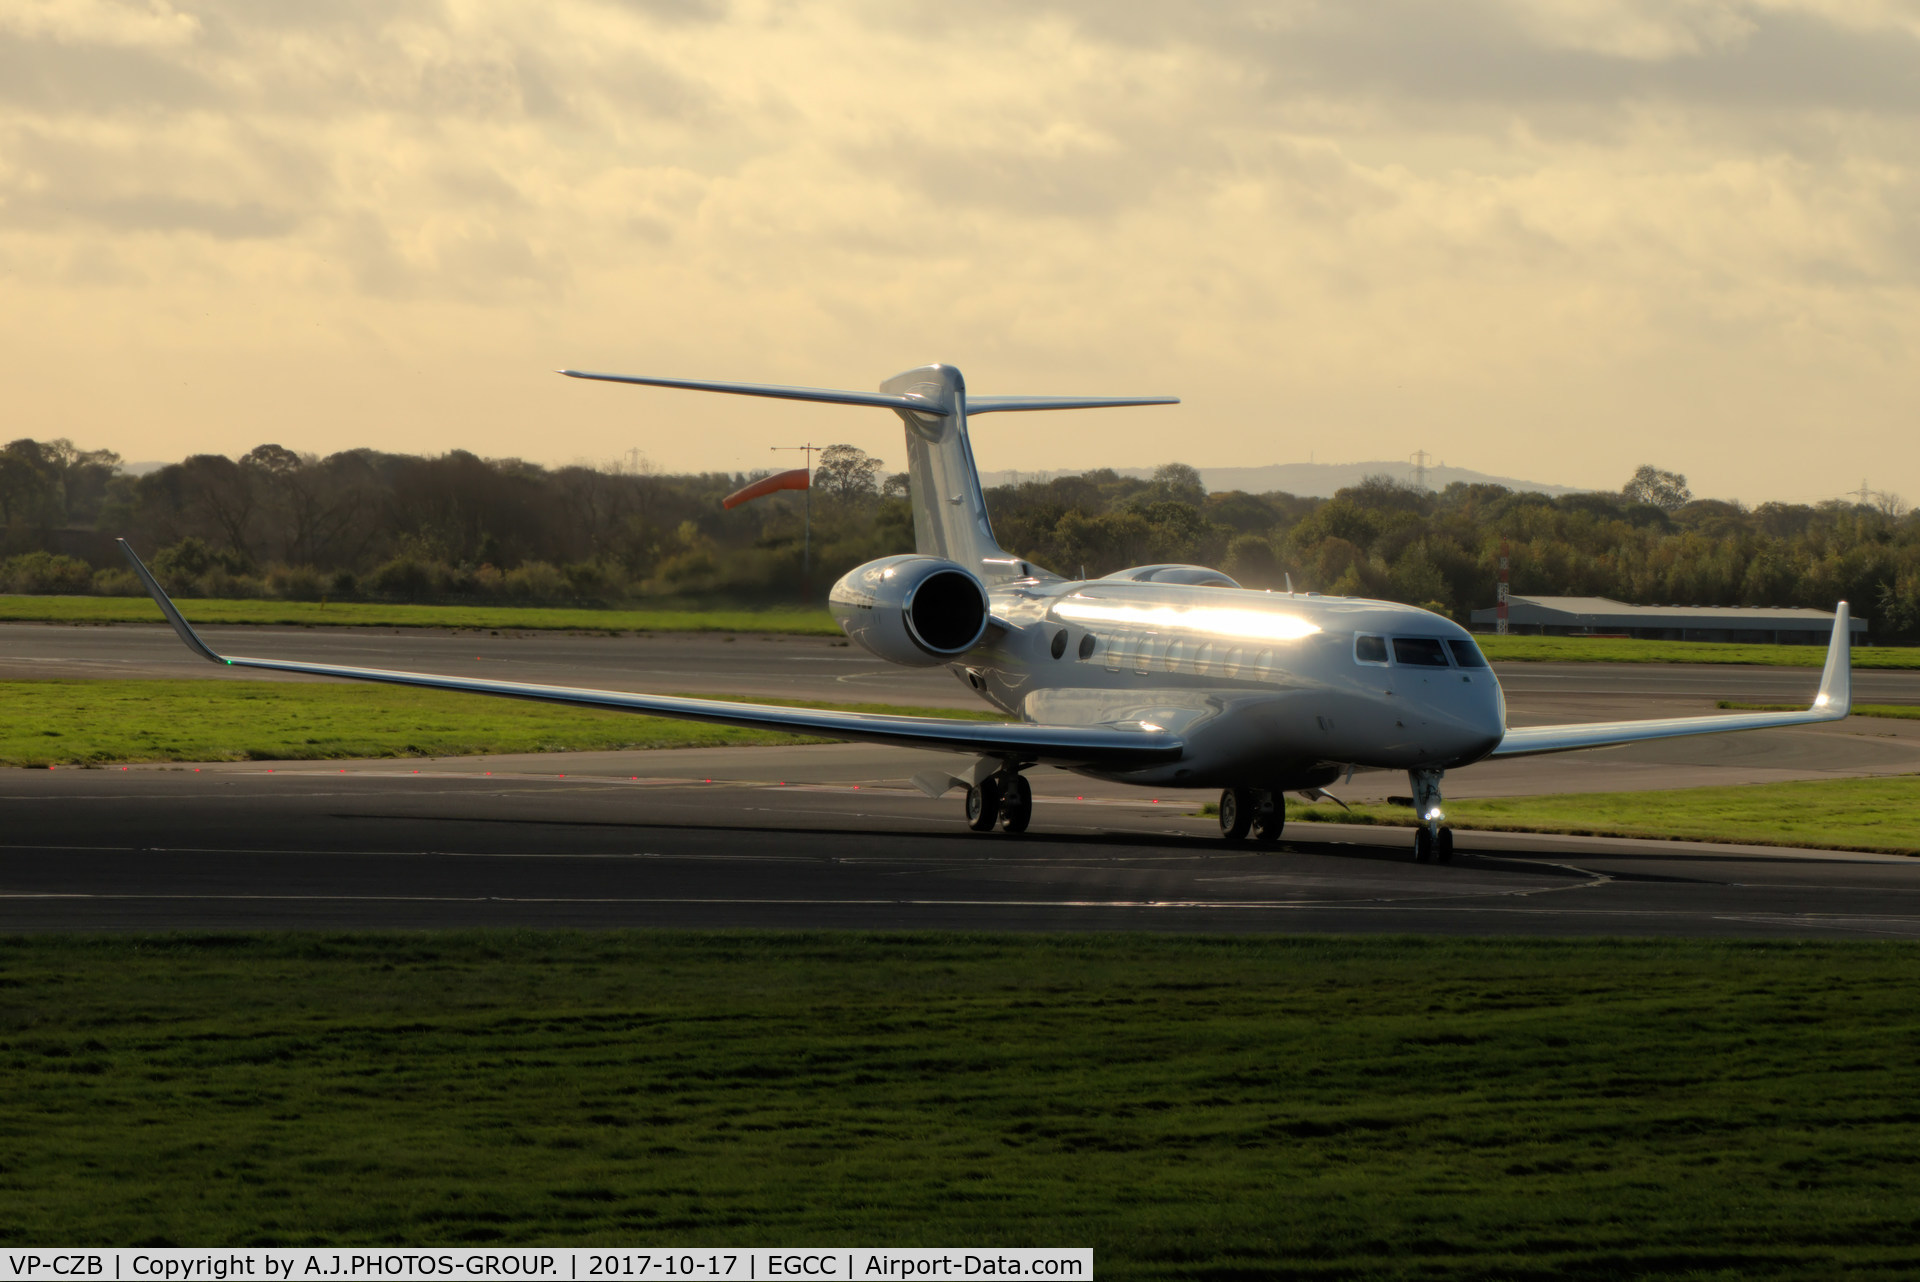 VP-CZB, 2015 Gulfstream Aerospace G650 (G-VI) C/N 6129, taxing in to go to the FBO exc ramp